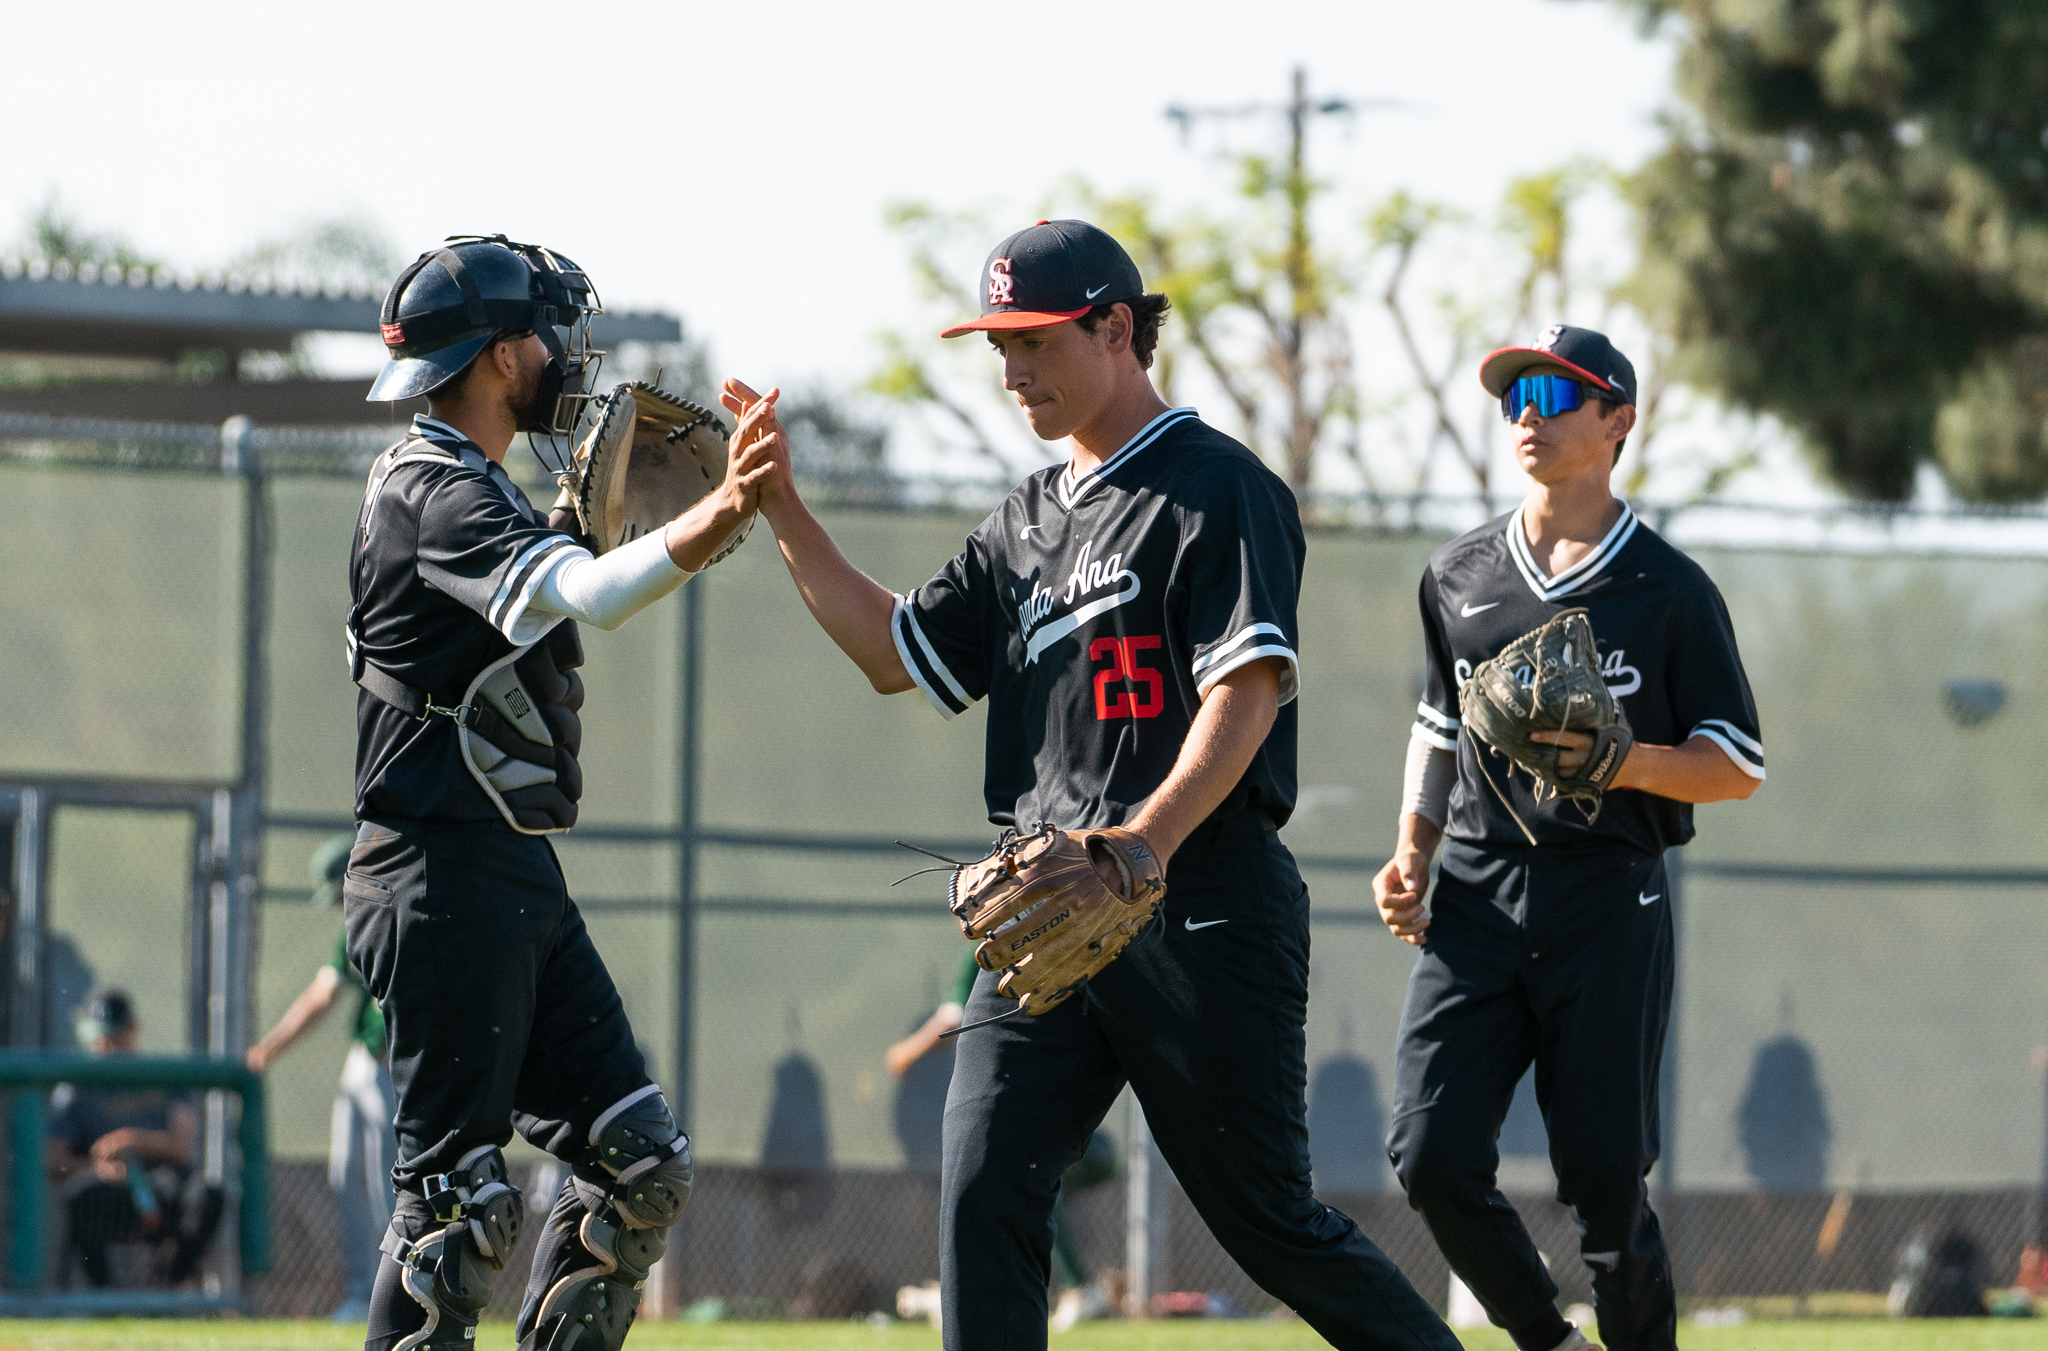 Santa Ana Tops Golden West 5-4 to Complete Three Game Sweep in OEC Play